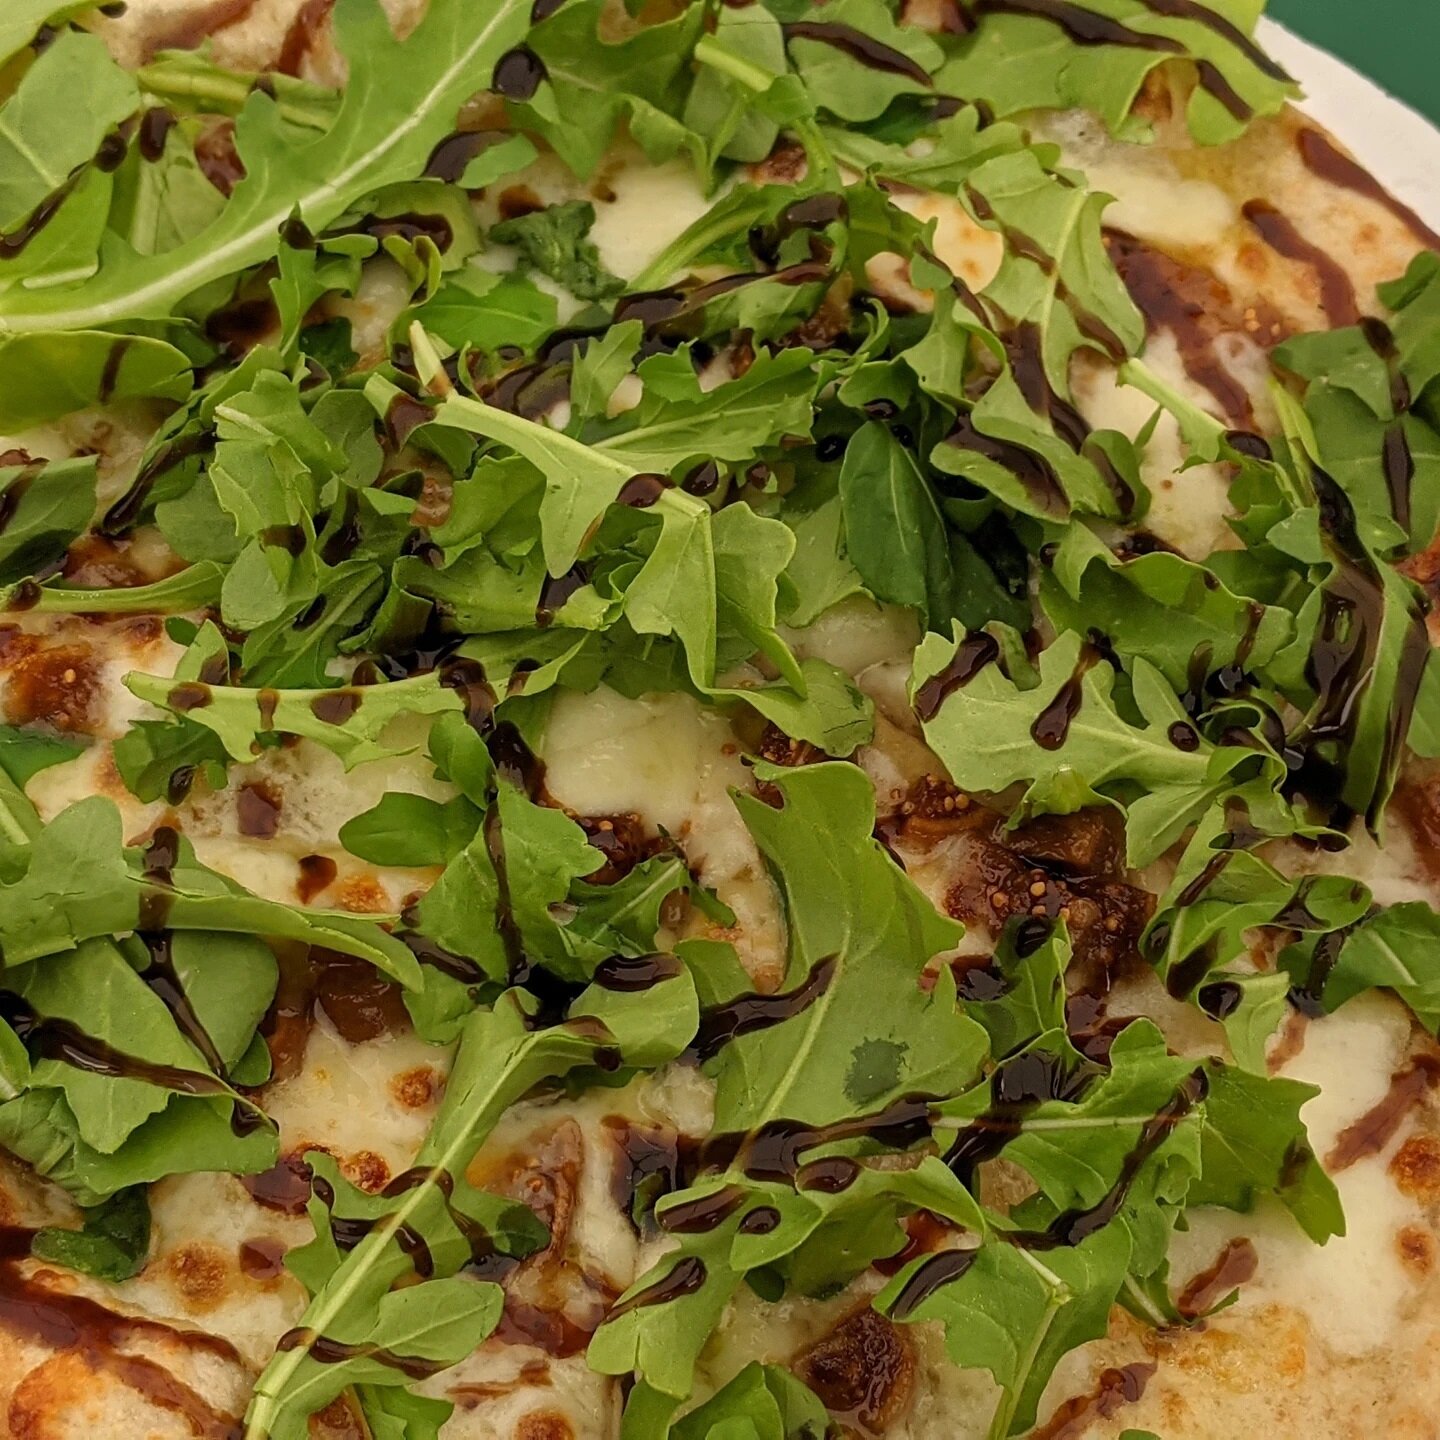 Fig and Rocket

Savory and sweet is the magic

#weddingpizza #centralpacaterer